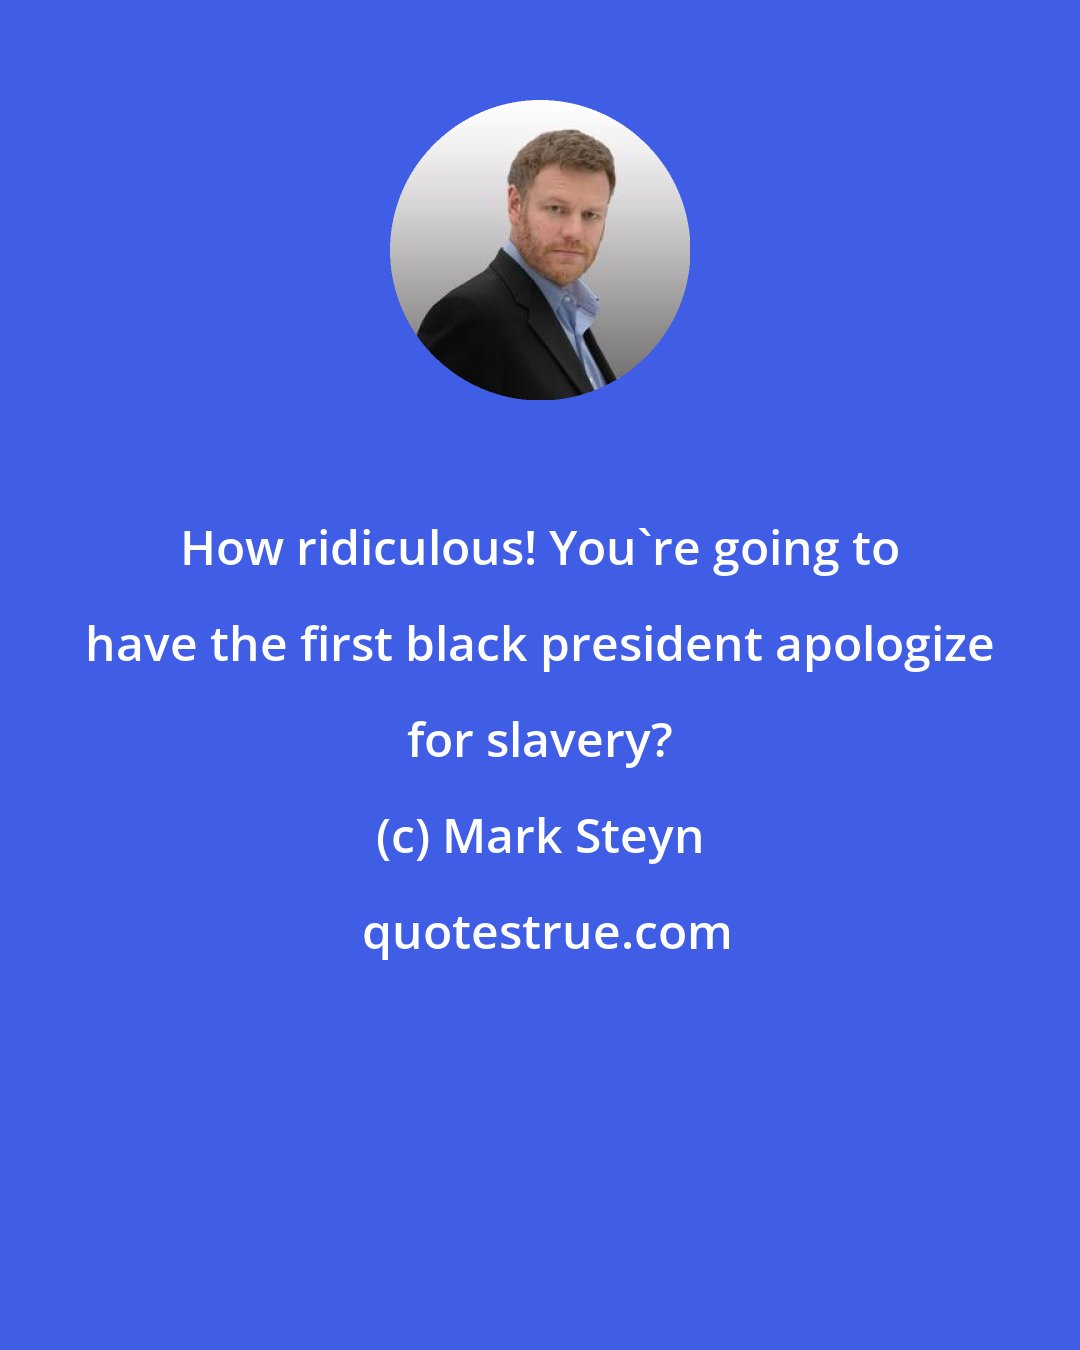 Mark Steyn: How ridiculous! You're going to have the first black president apologize for slavery?